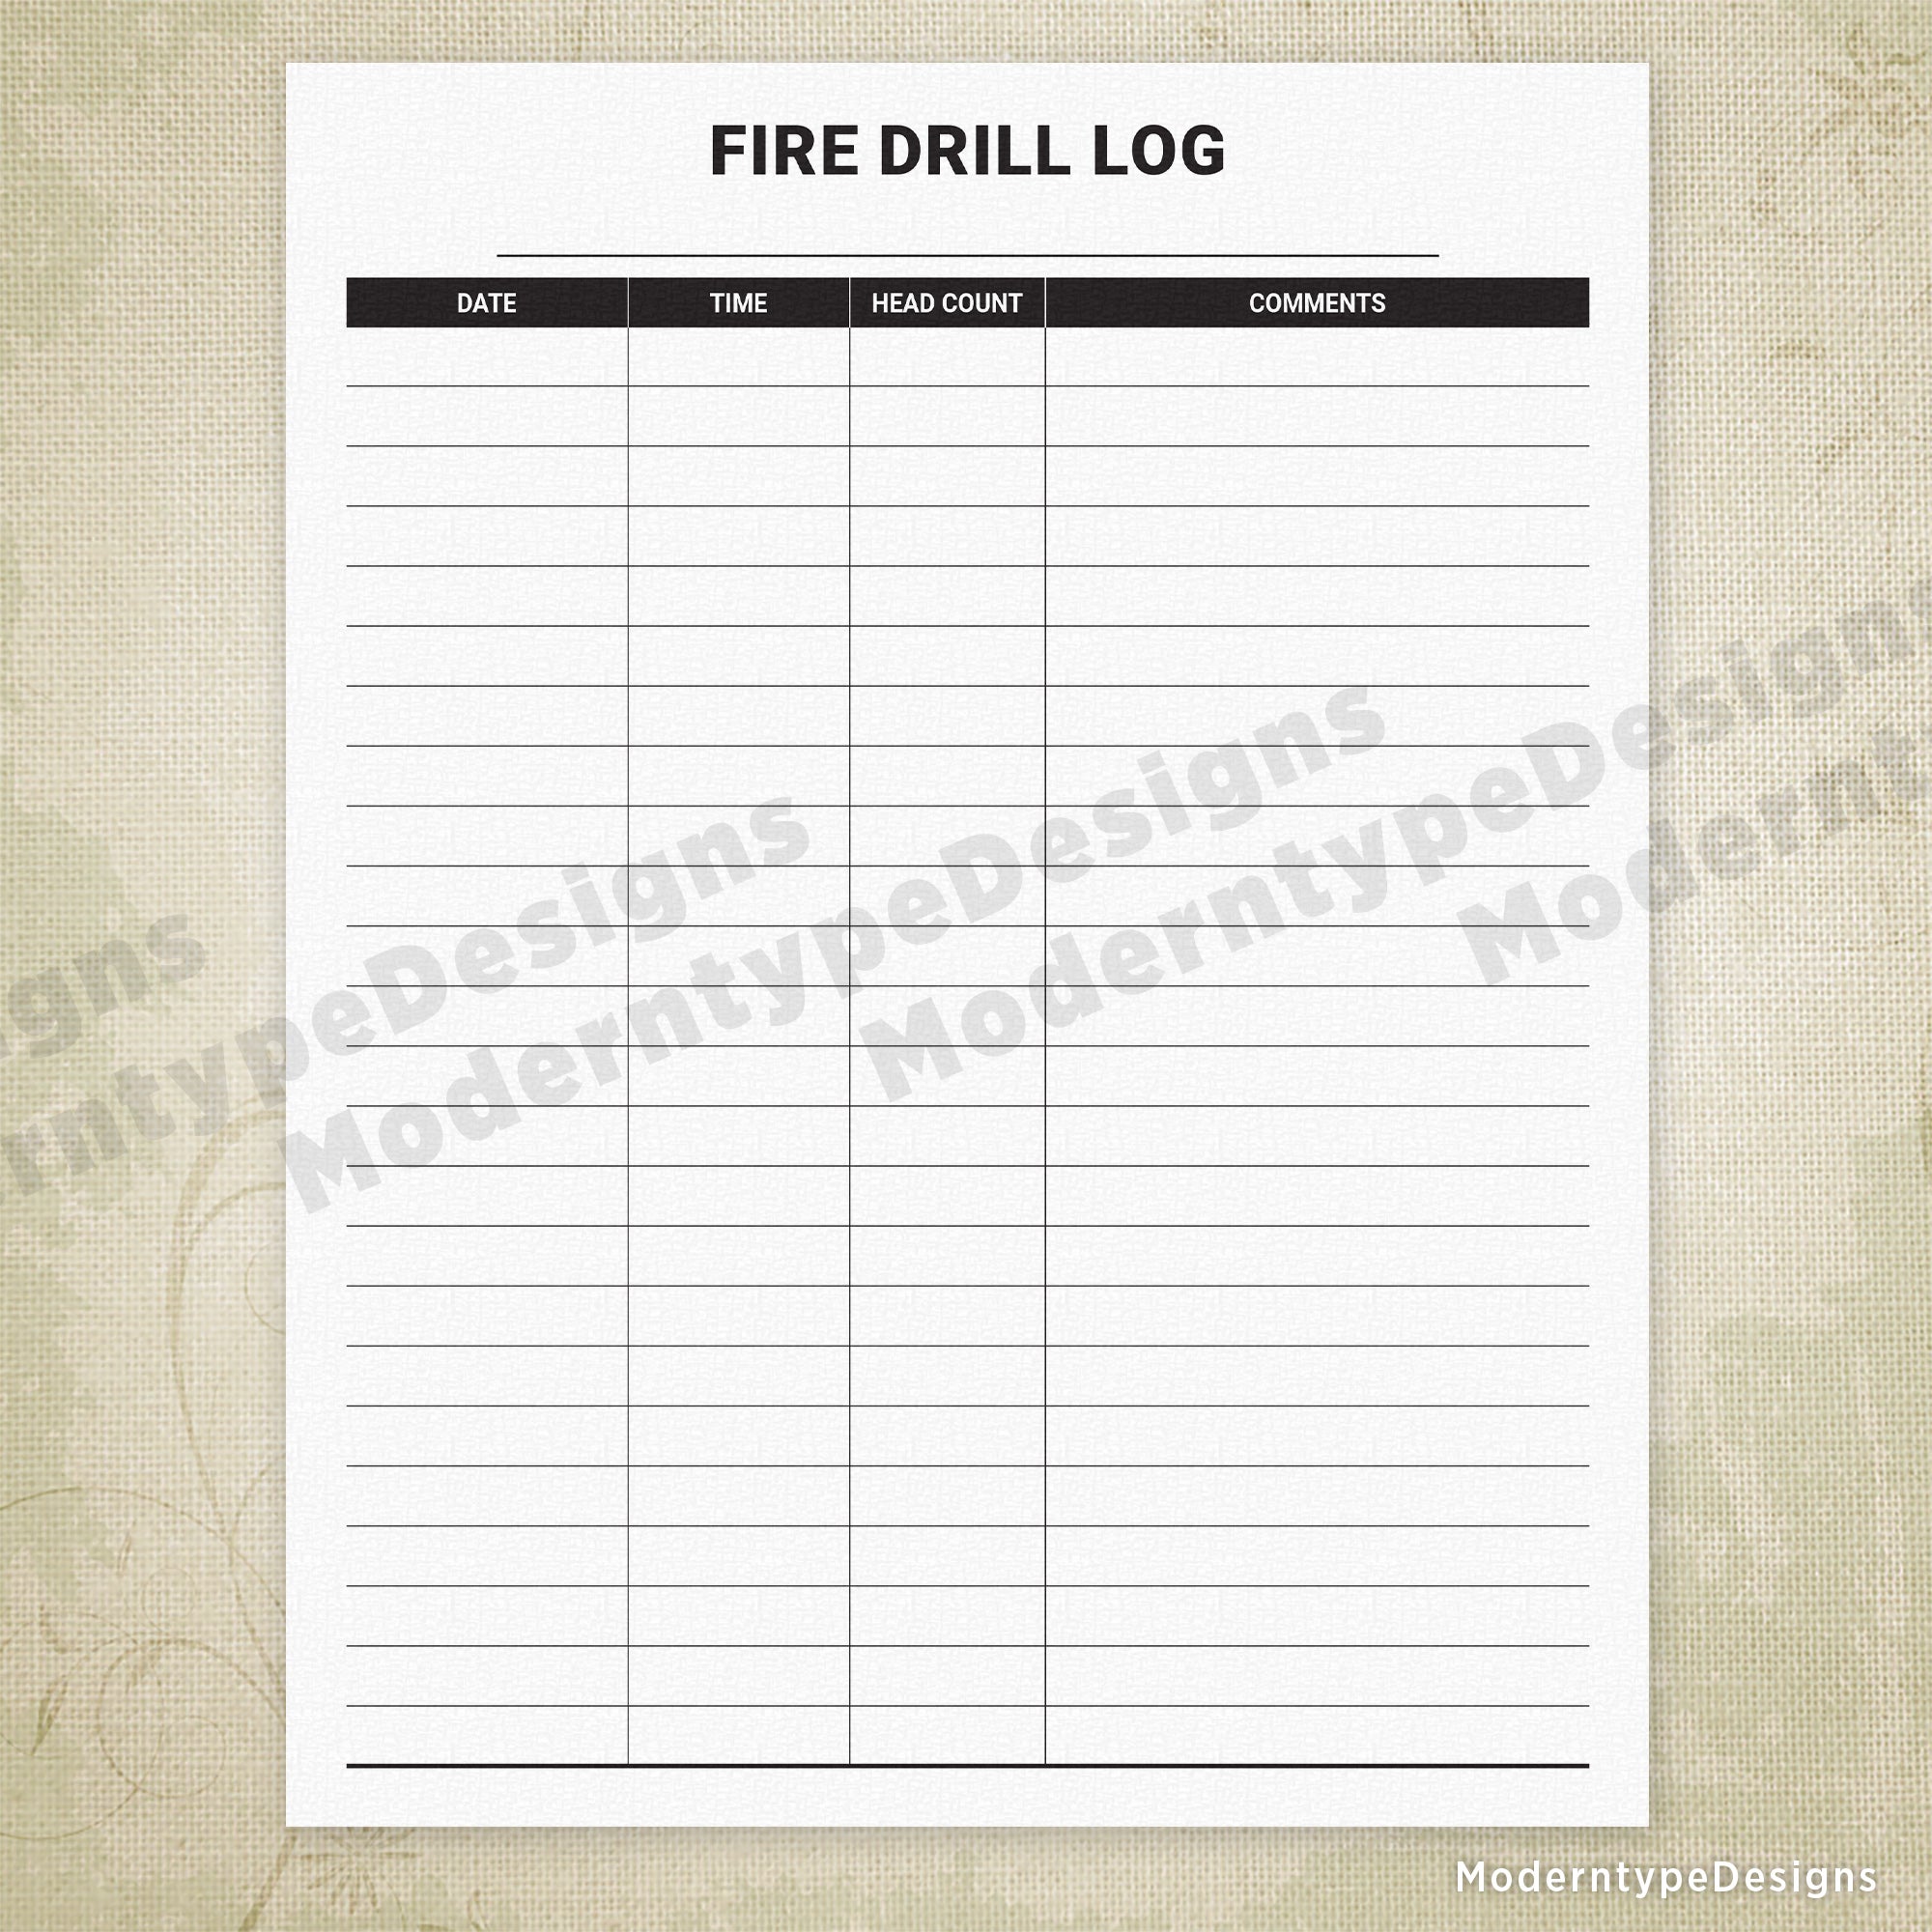 Fire Drill Log Printable for any Building